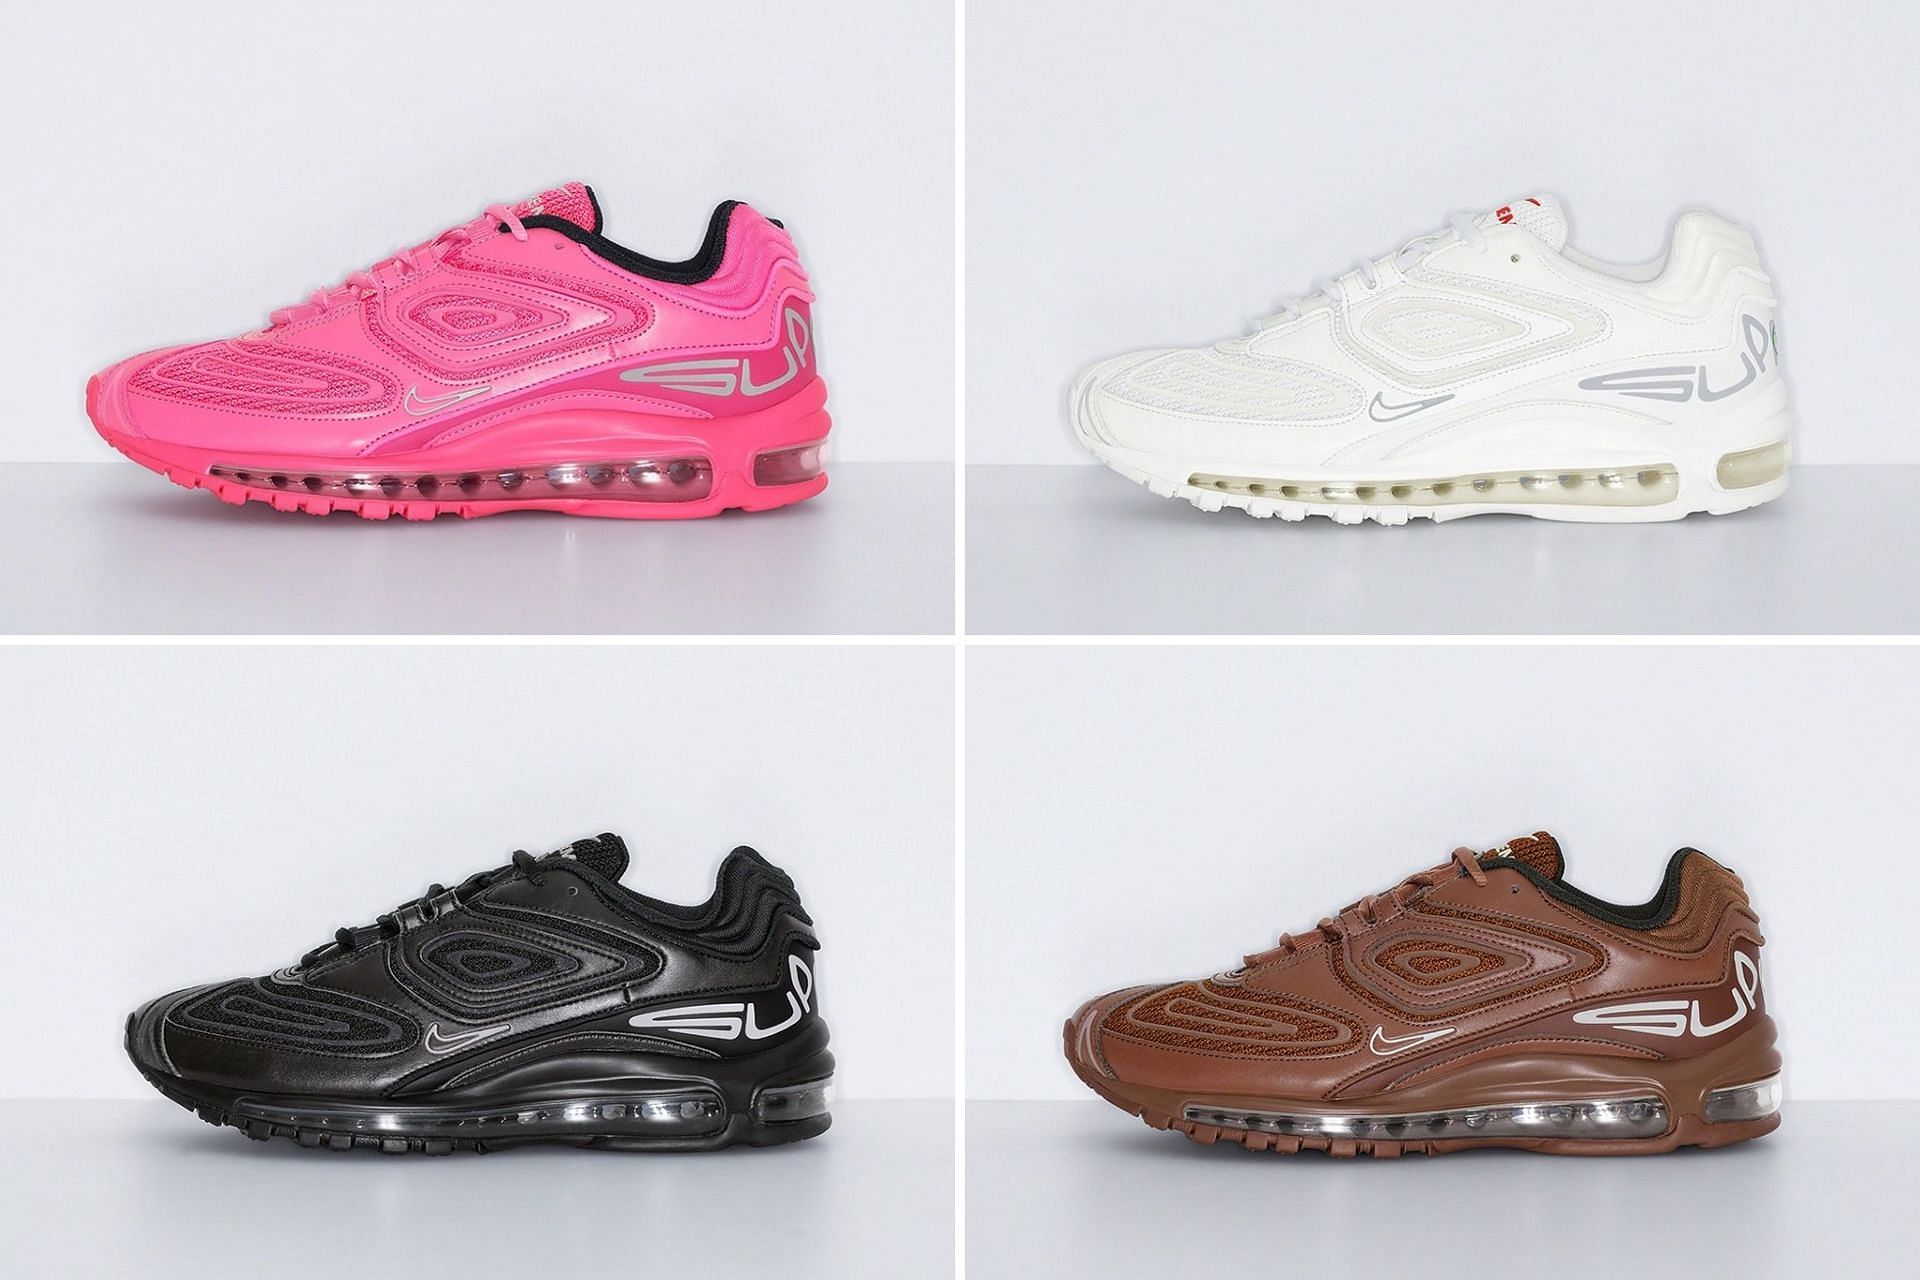 Where to buy Supreme x Nike Air Max 98 TL Fall collection? Release